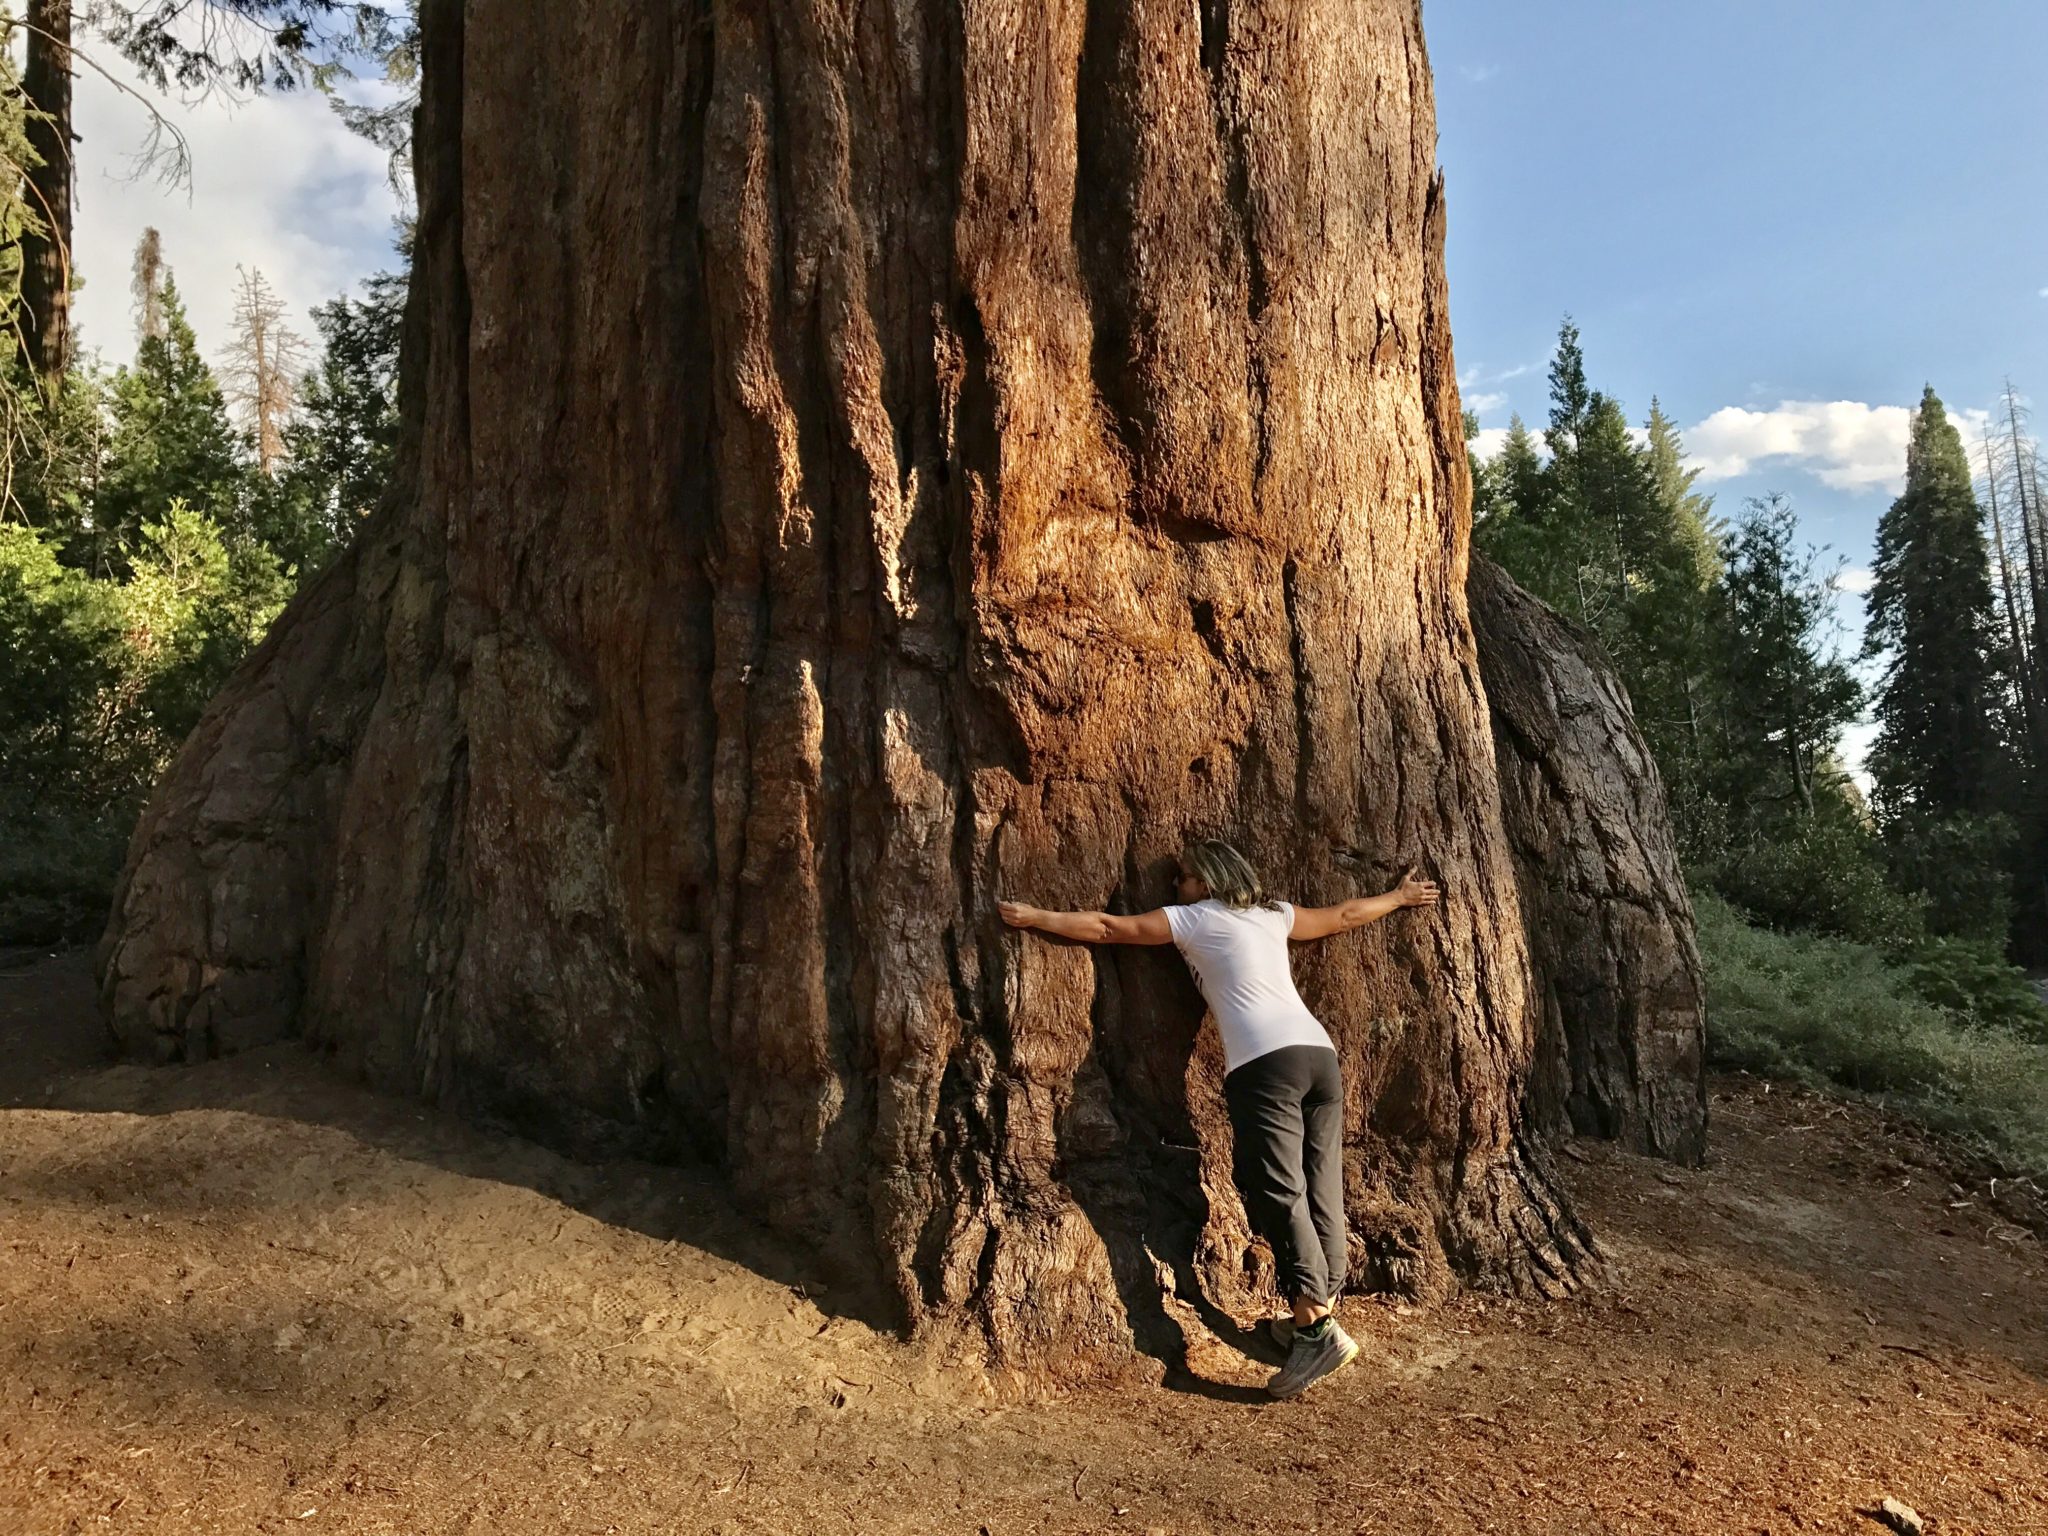 Hugging a Giant Sequoia